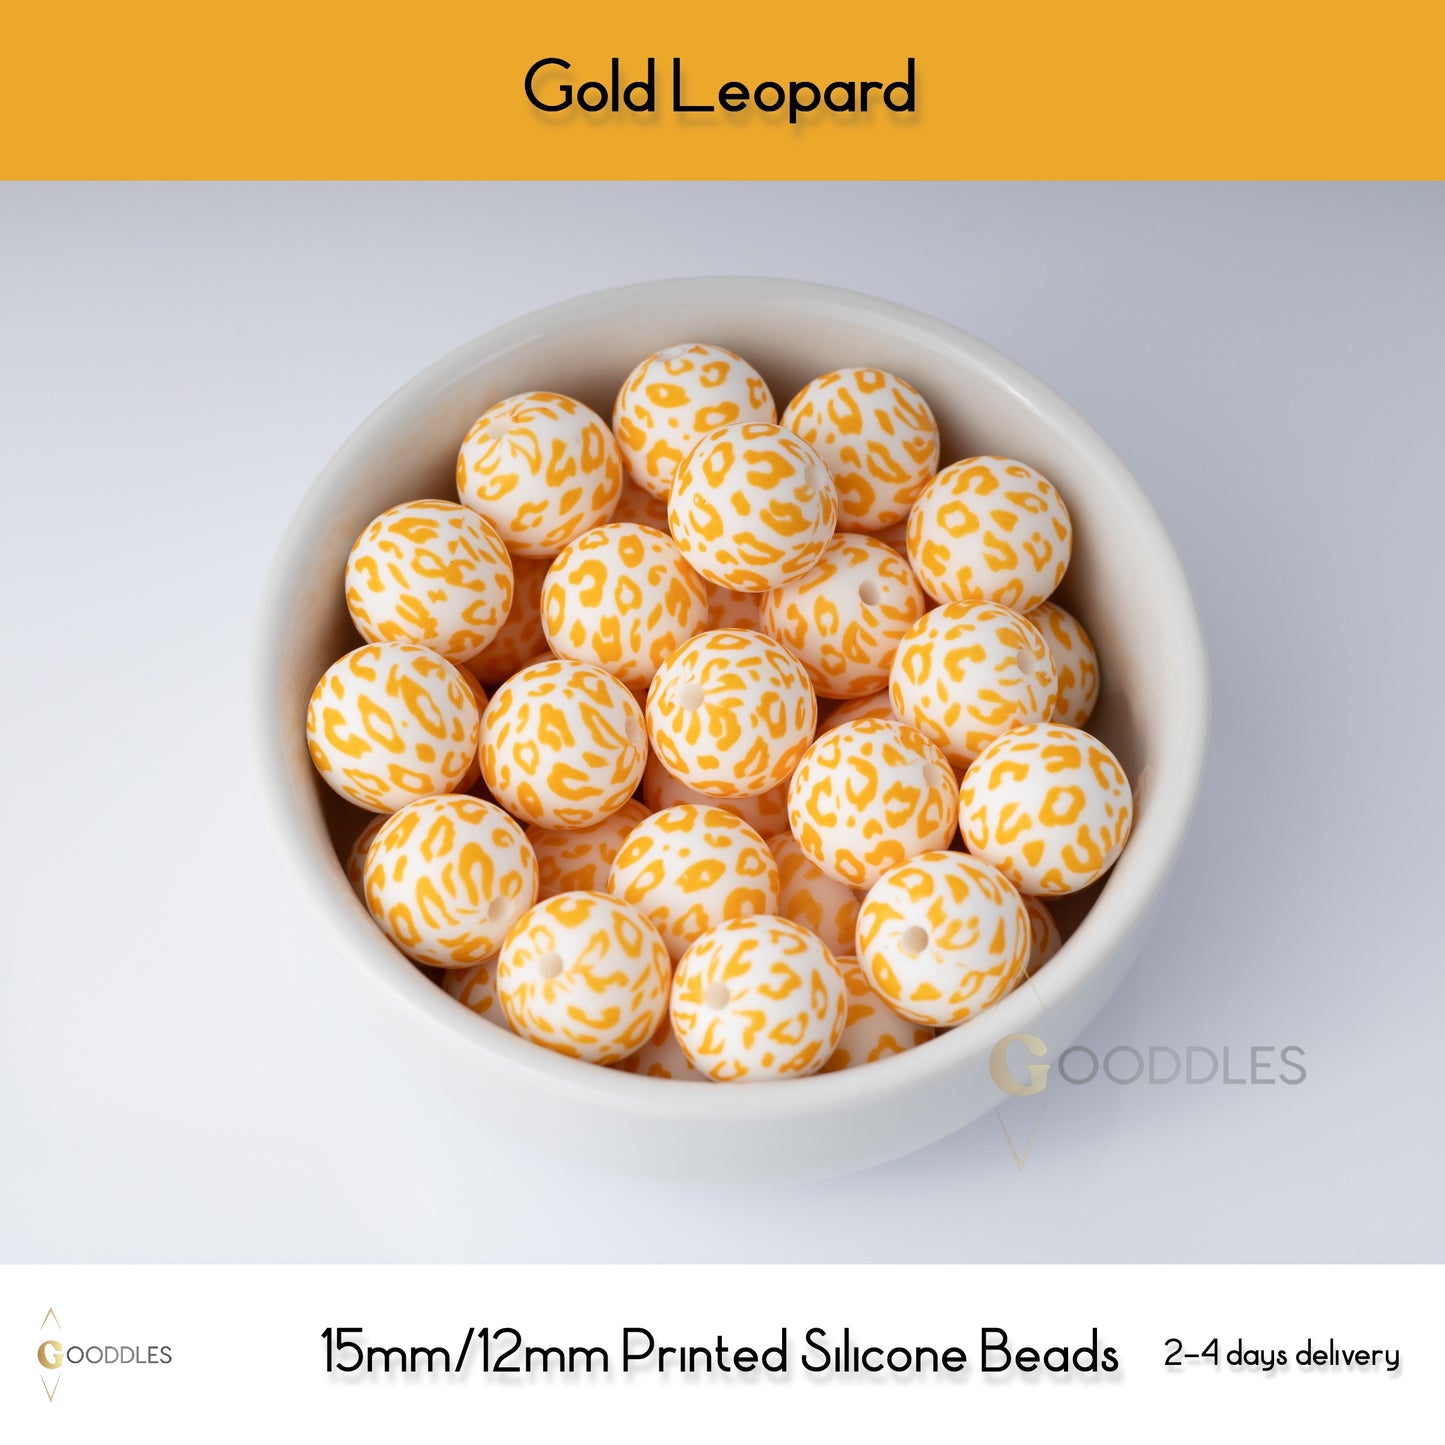 5pcs, Gold Leopard Silicone Beads Printed Round Silicone Beads